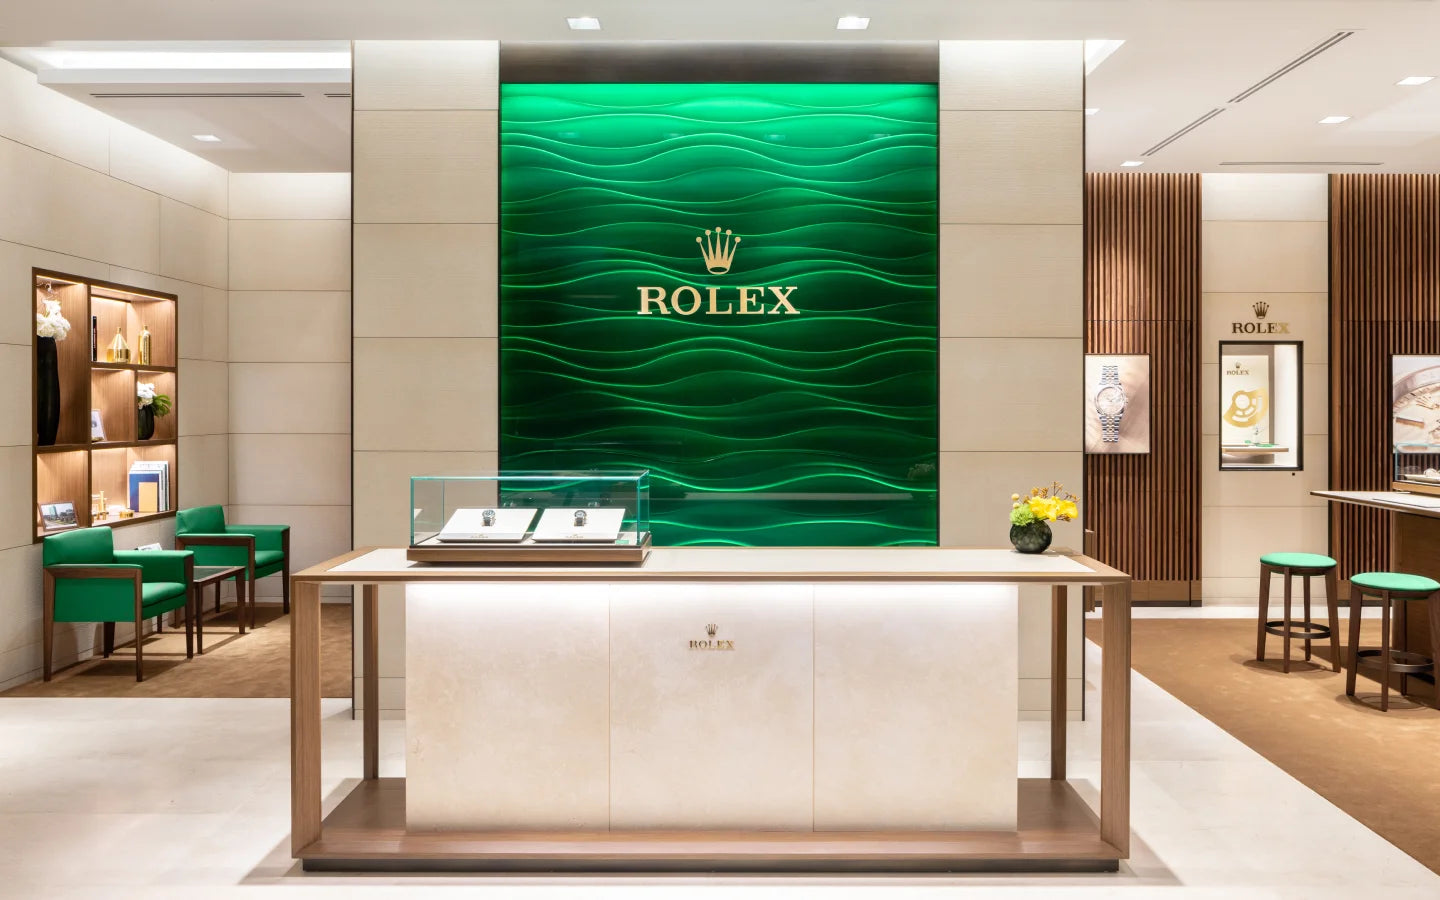 Rolex watches at Orr's Jewelers in Sewickley, PA